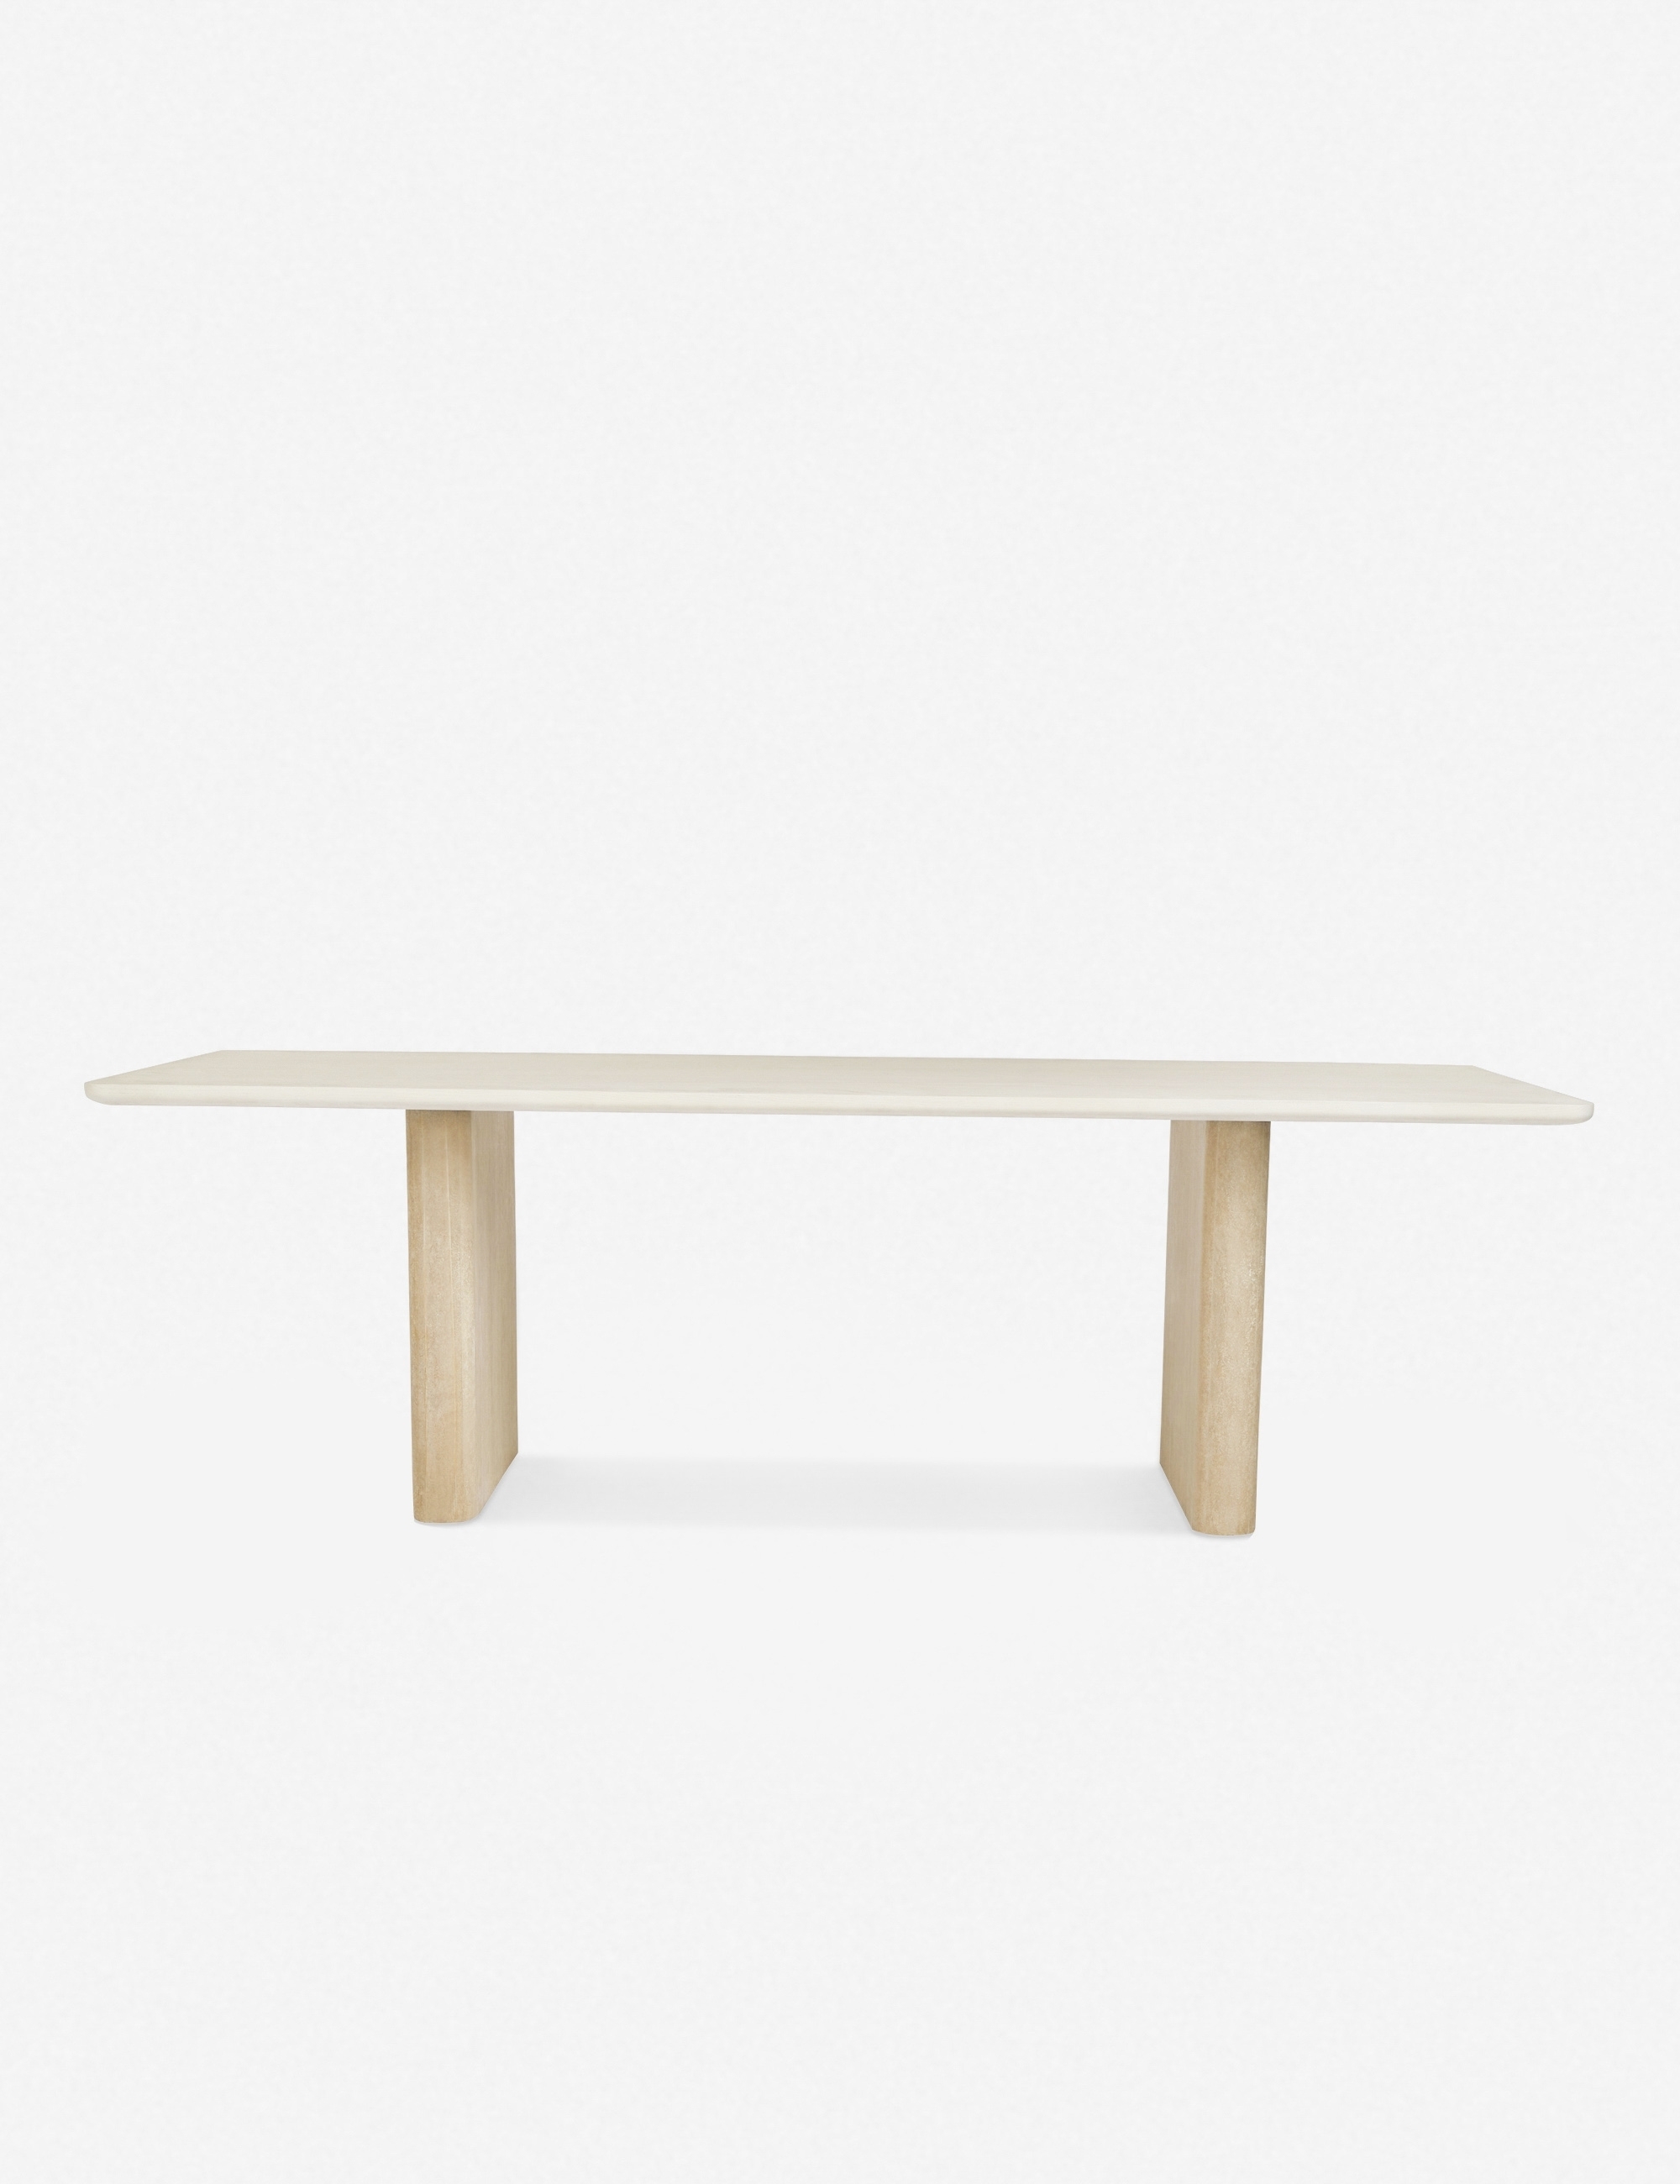 Embrey Dining Table - Image 2